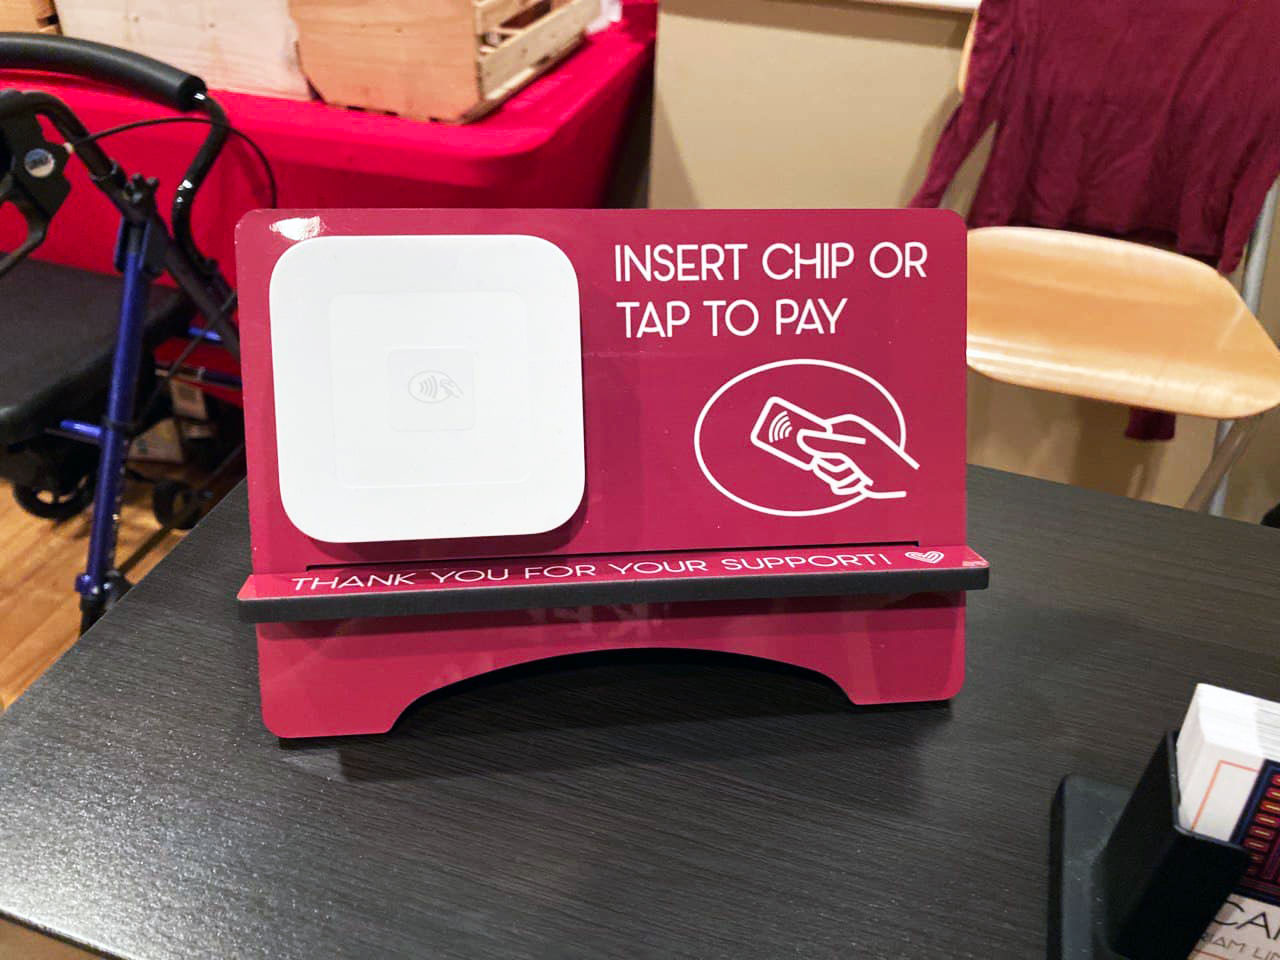 I used this image stand to hold my chip reader to make it easier for customers to do touchless 